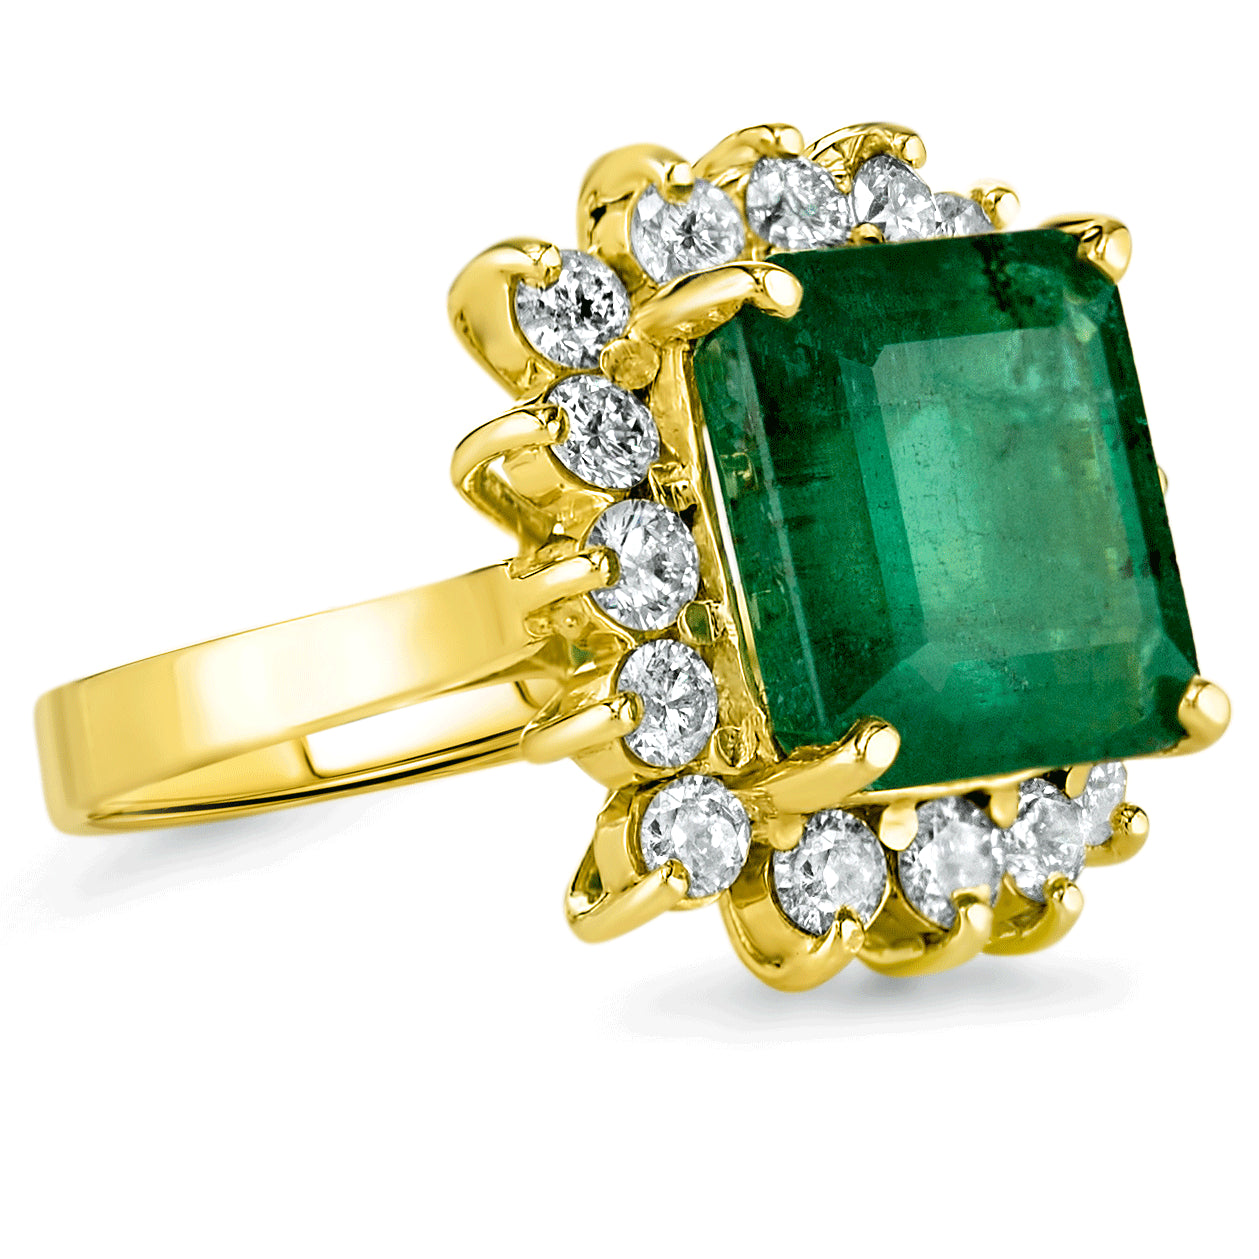 7.90cts Natural Emerald and 1.27cttw Diamonds 14K Yellow Gold Ring 7.00 gm